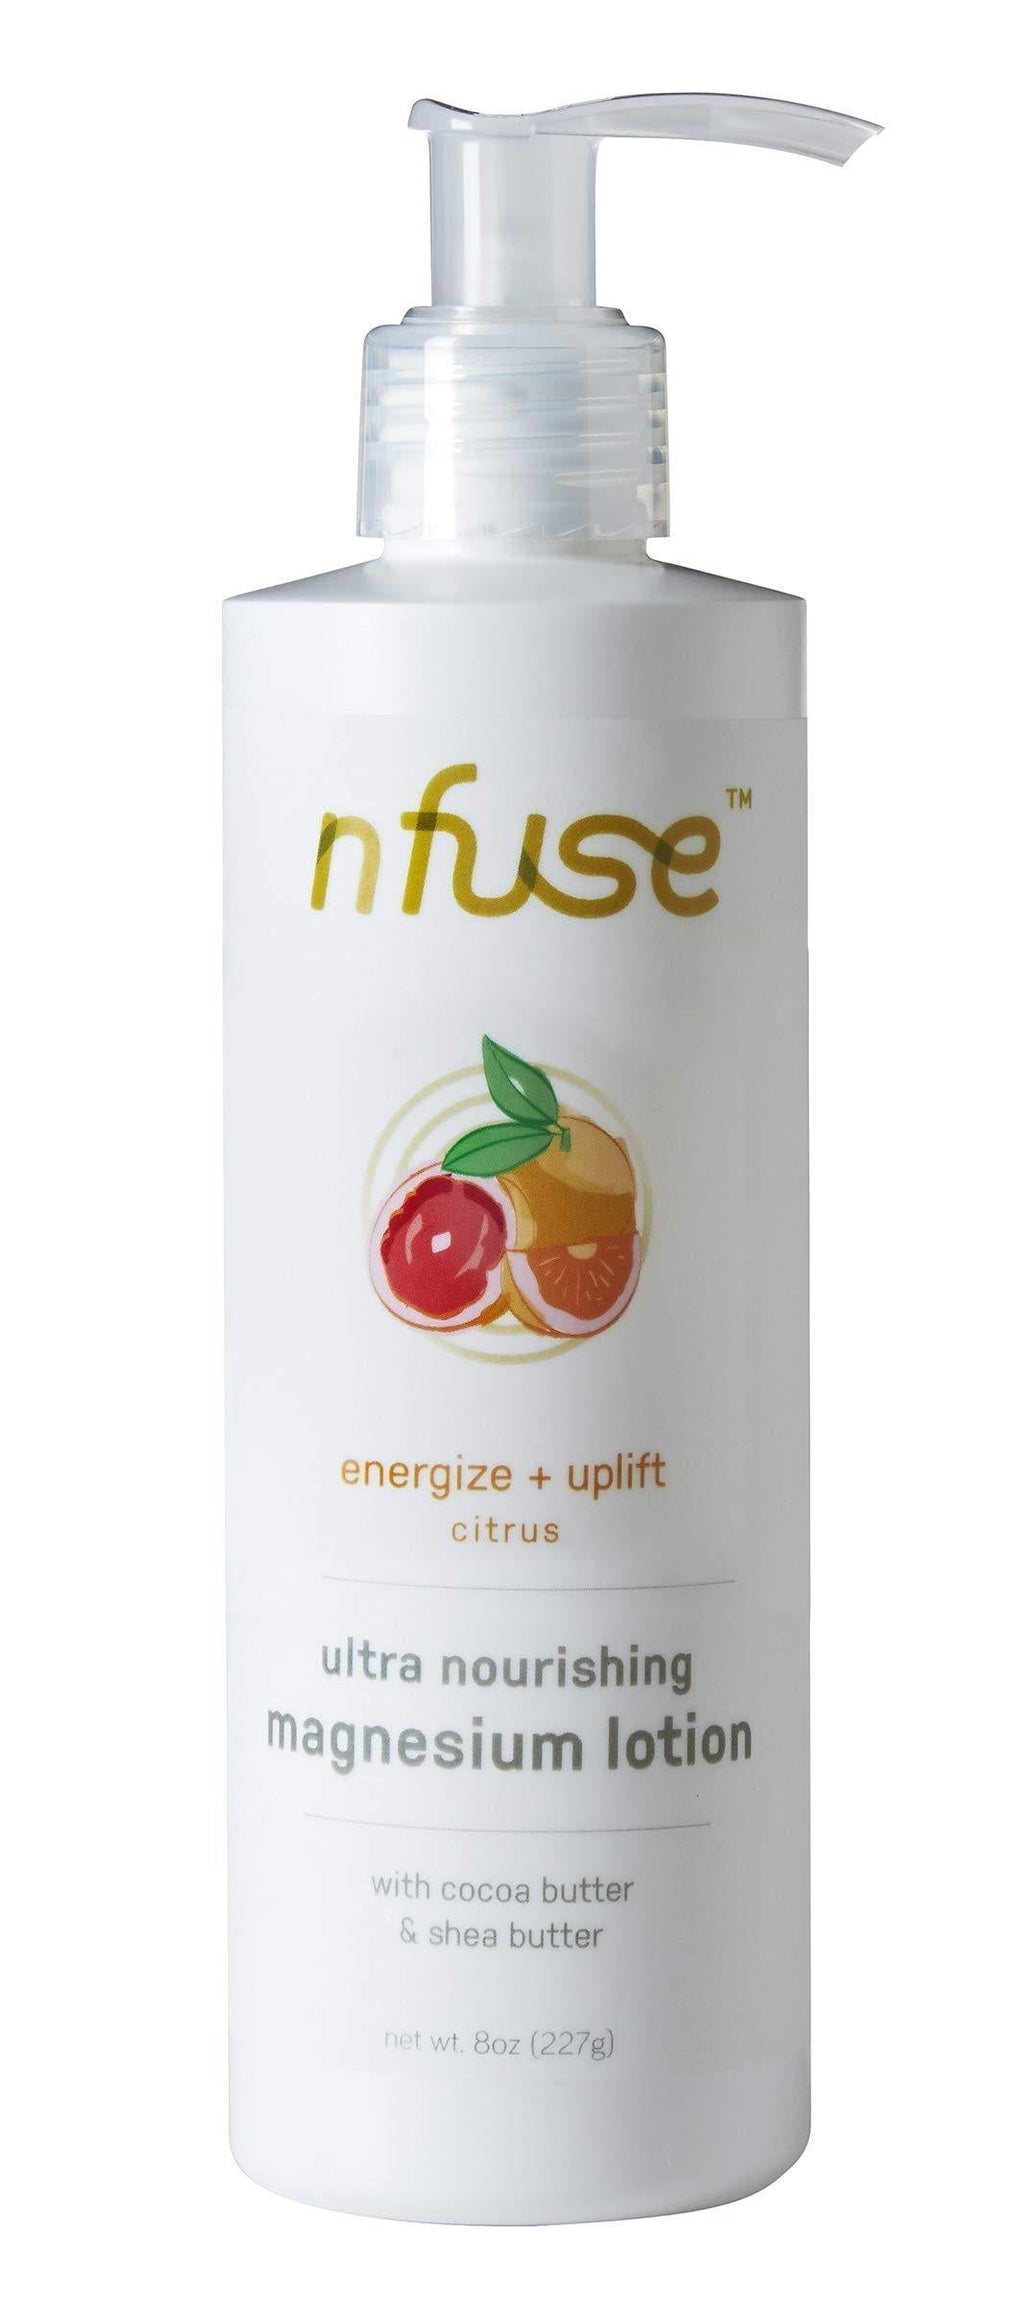 nfuse Magnesium Body Lotion - Mg++ Delivery Technology - Pure Magnesium Chloride U.S.P. - Aromatherapeutic Essential Oils - Citrus: Energize + Uplift - Energy, Vitality - 8 oz - BeesActive Australia